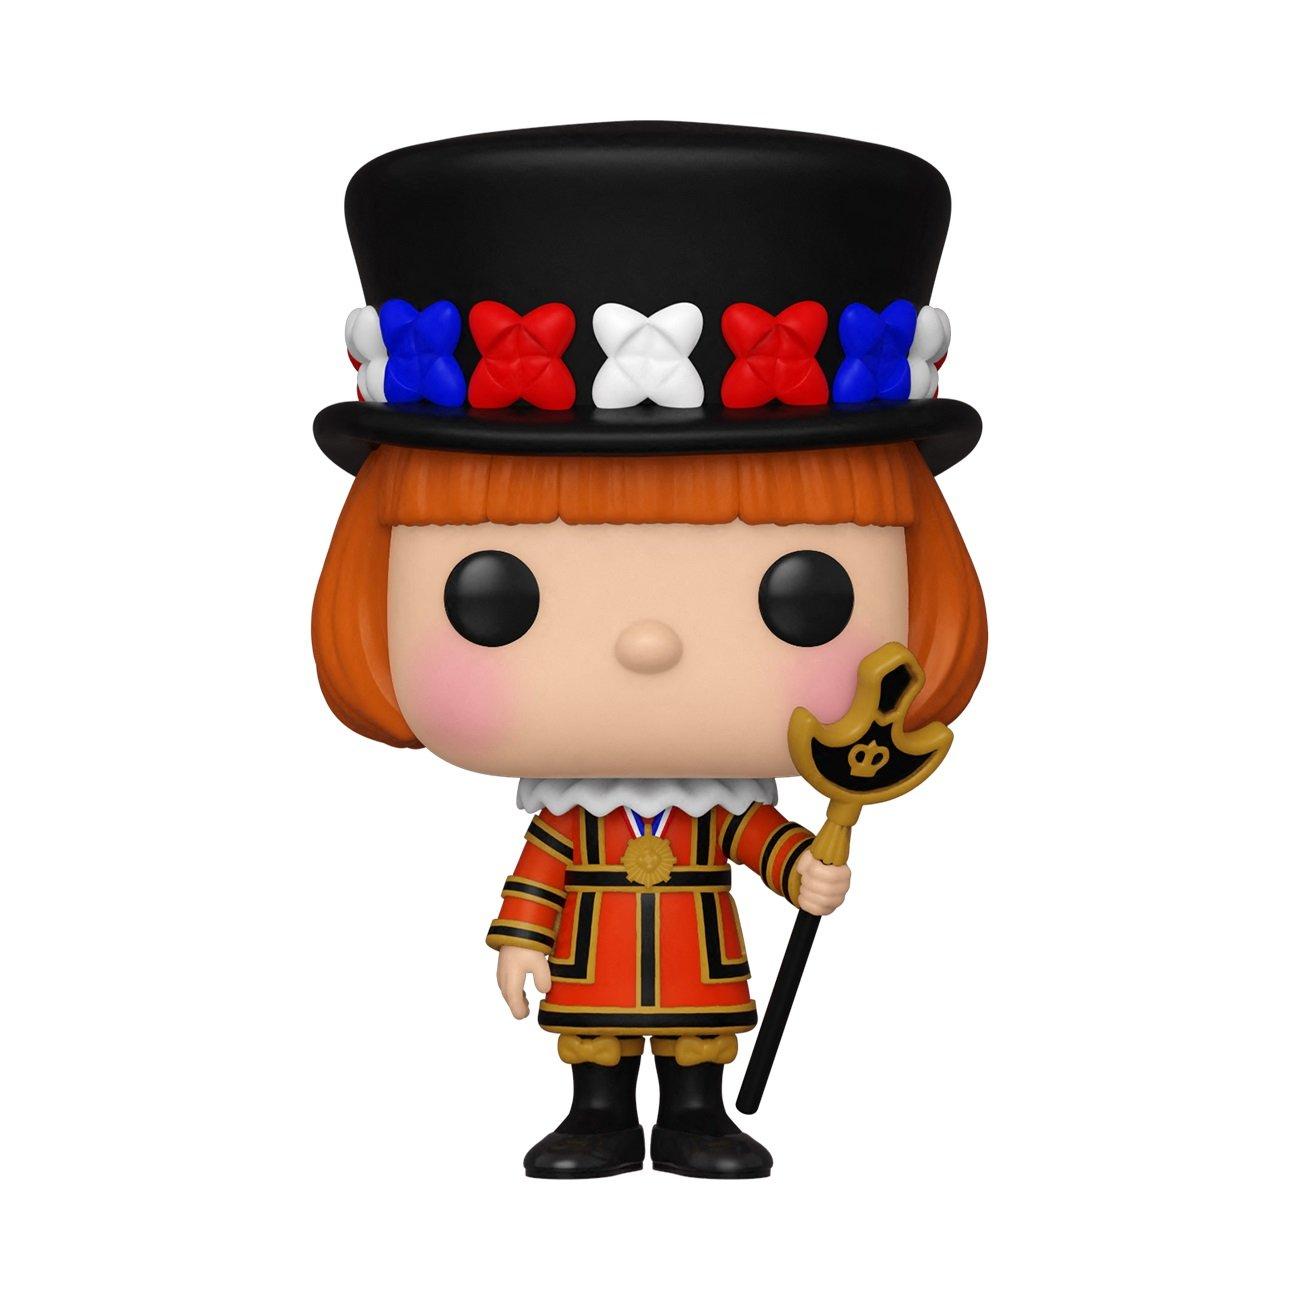 New Wonka Movie Launches a Wave of Funko Pops